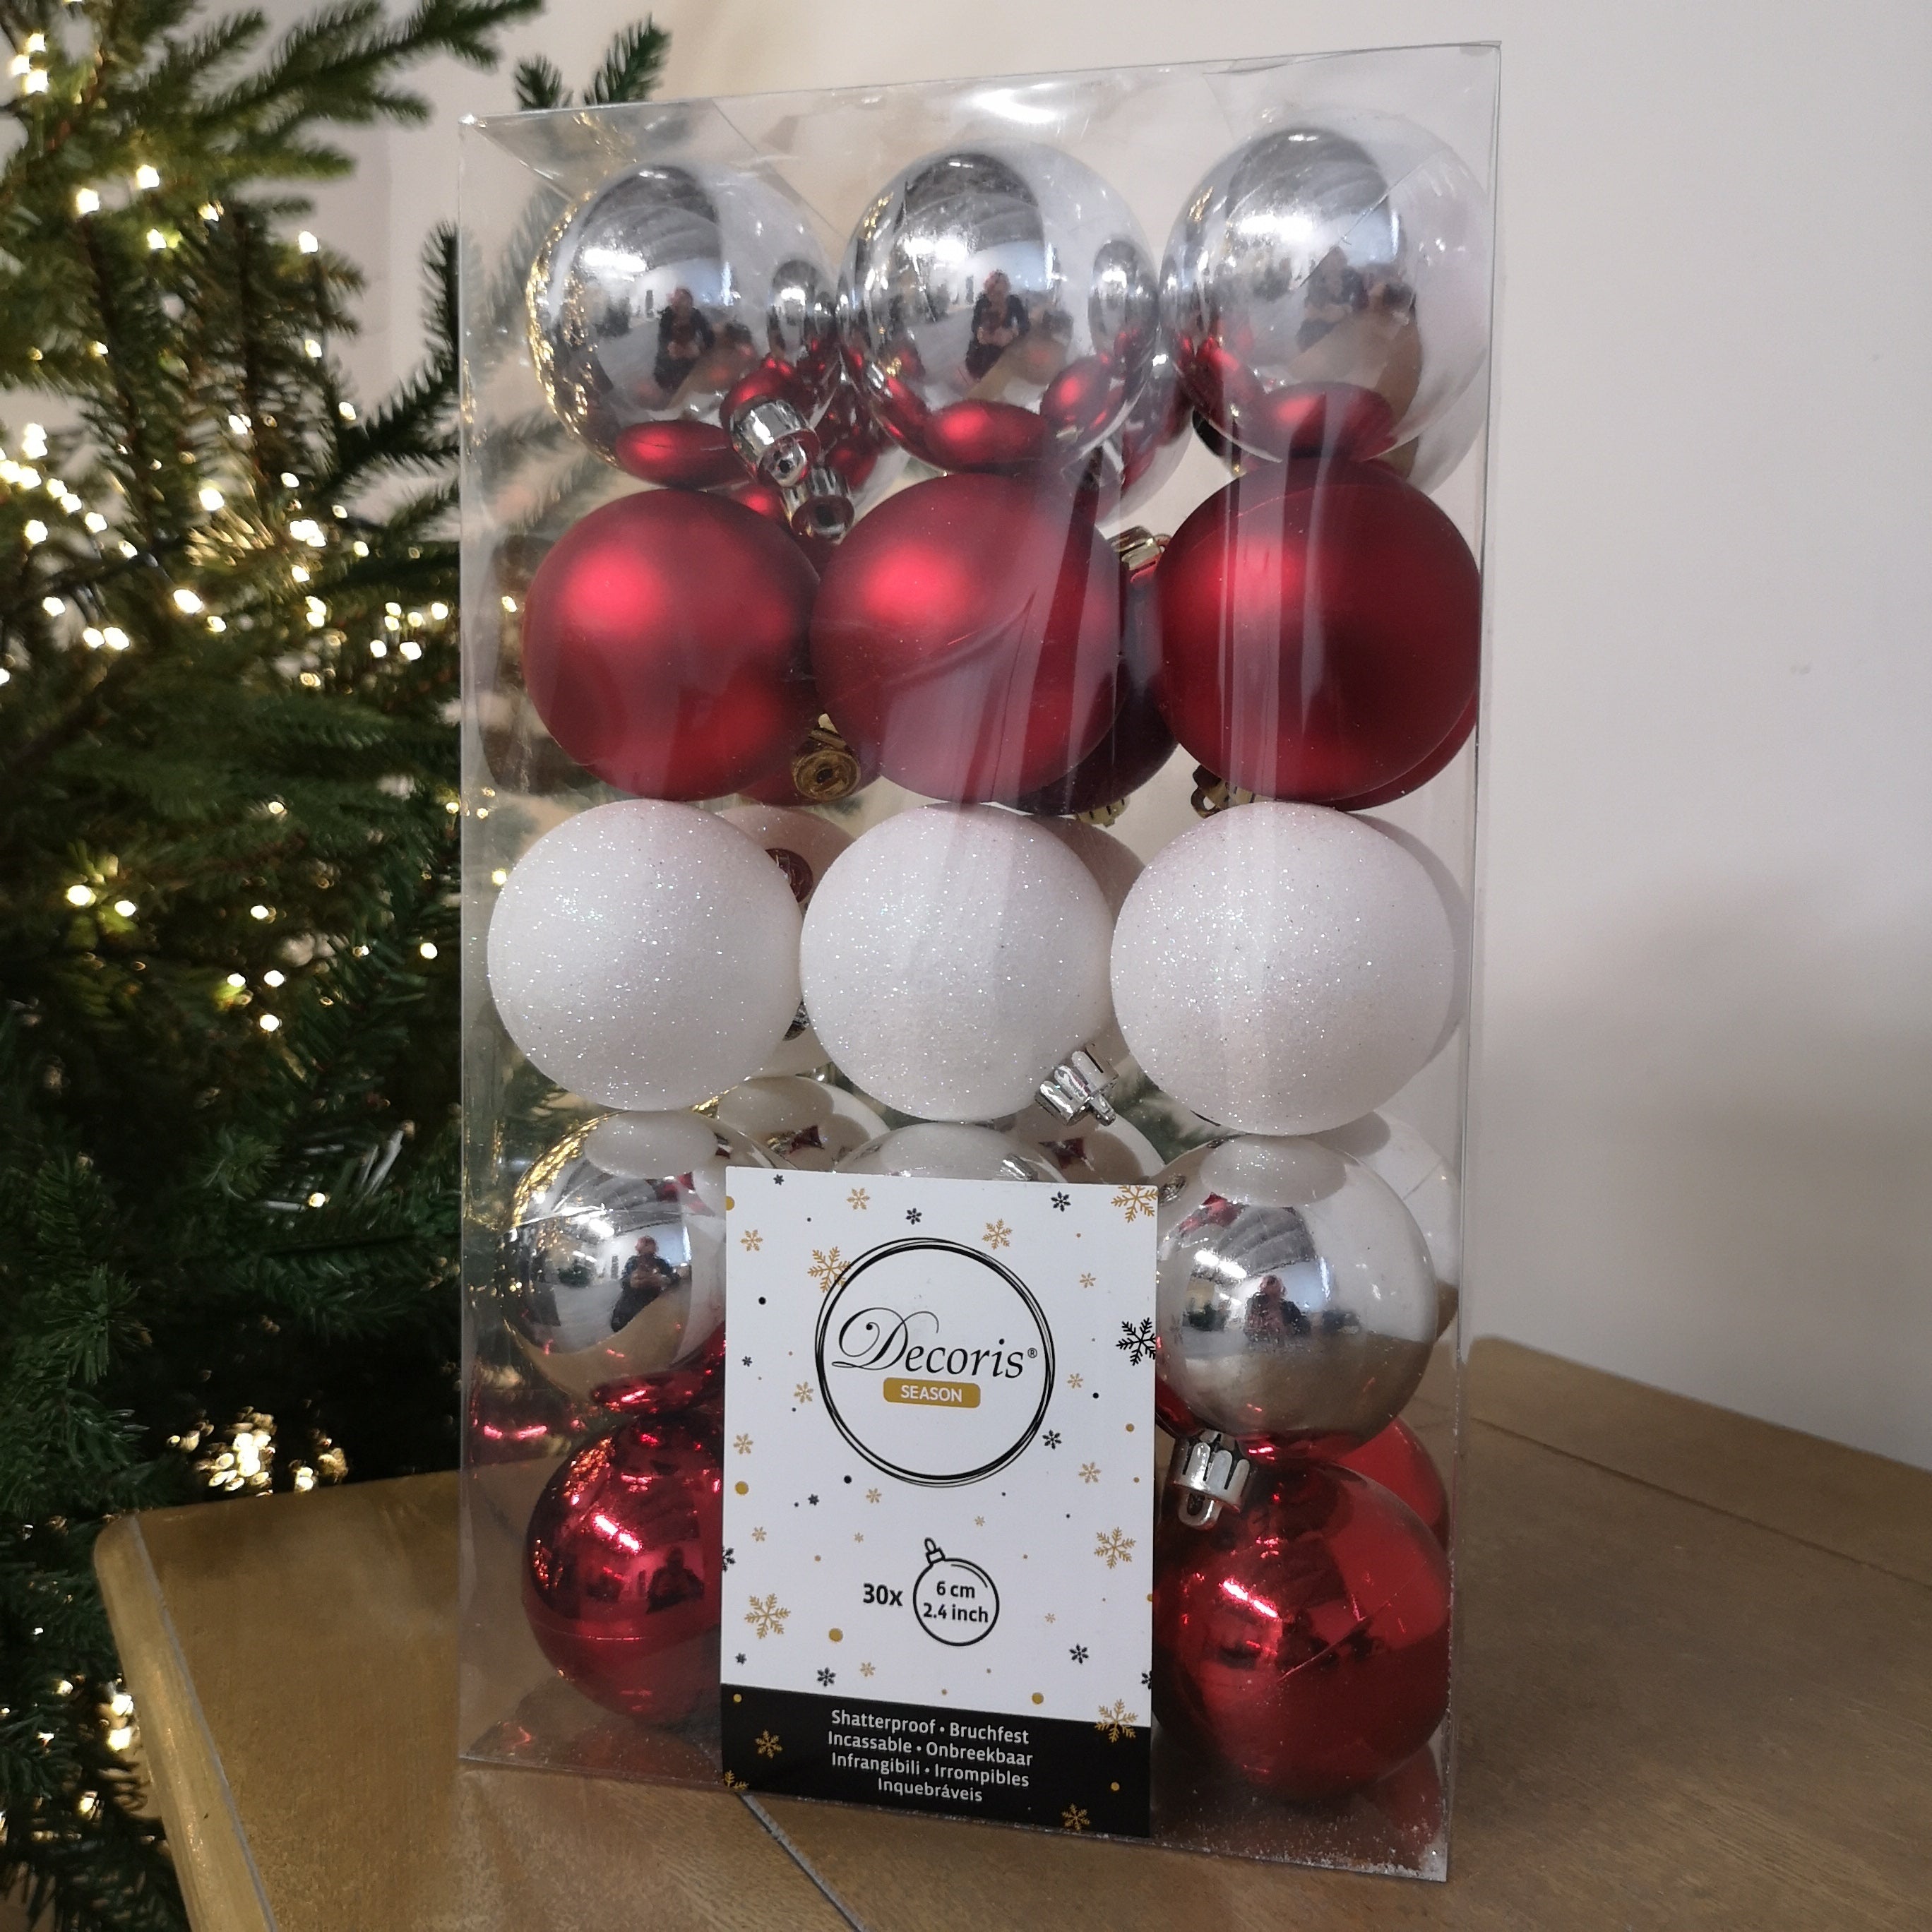 30 x 6cm Assorted Shatterproof Baubles, Red, White, Silver, Iridescent Glitter, Shiny, Matte Christmas Tree Decorations